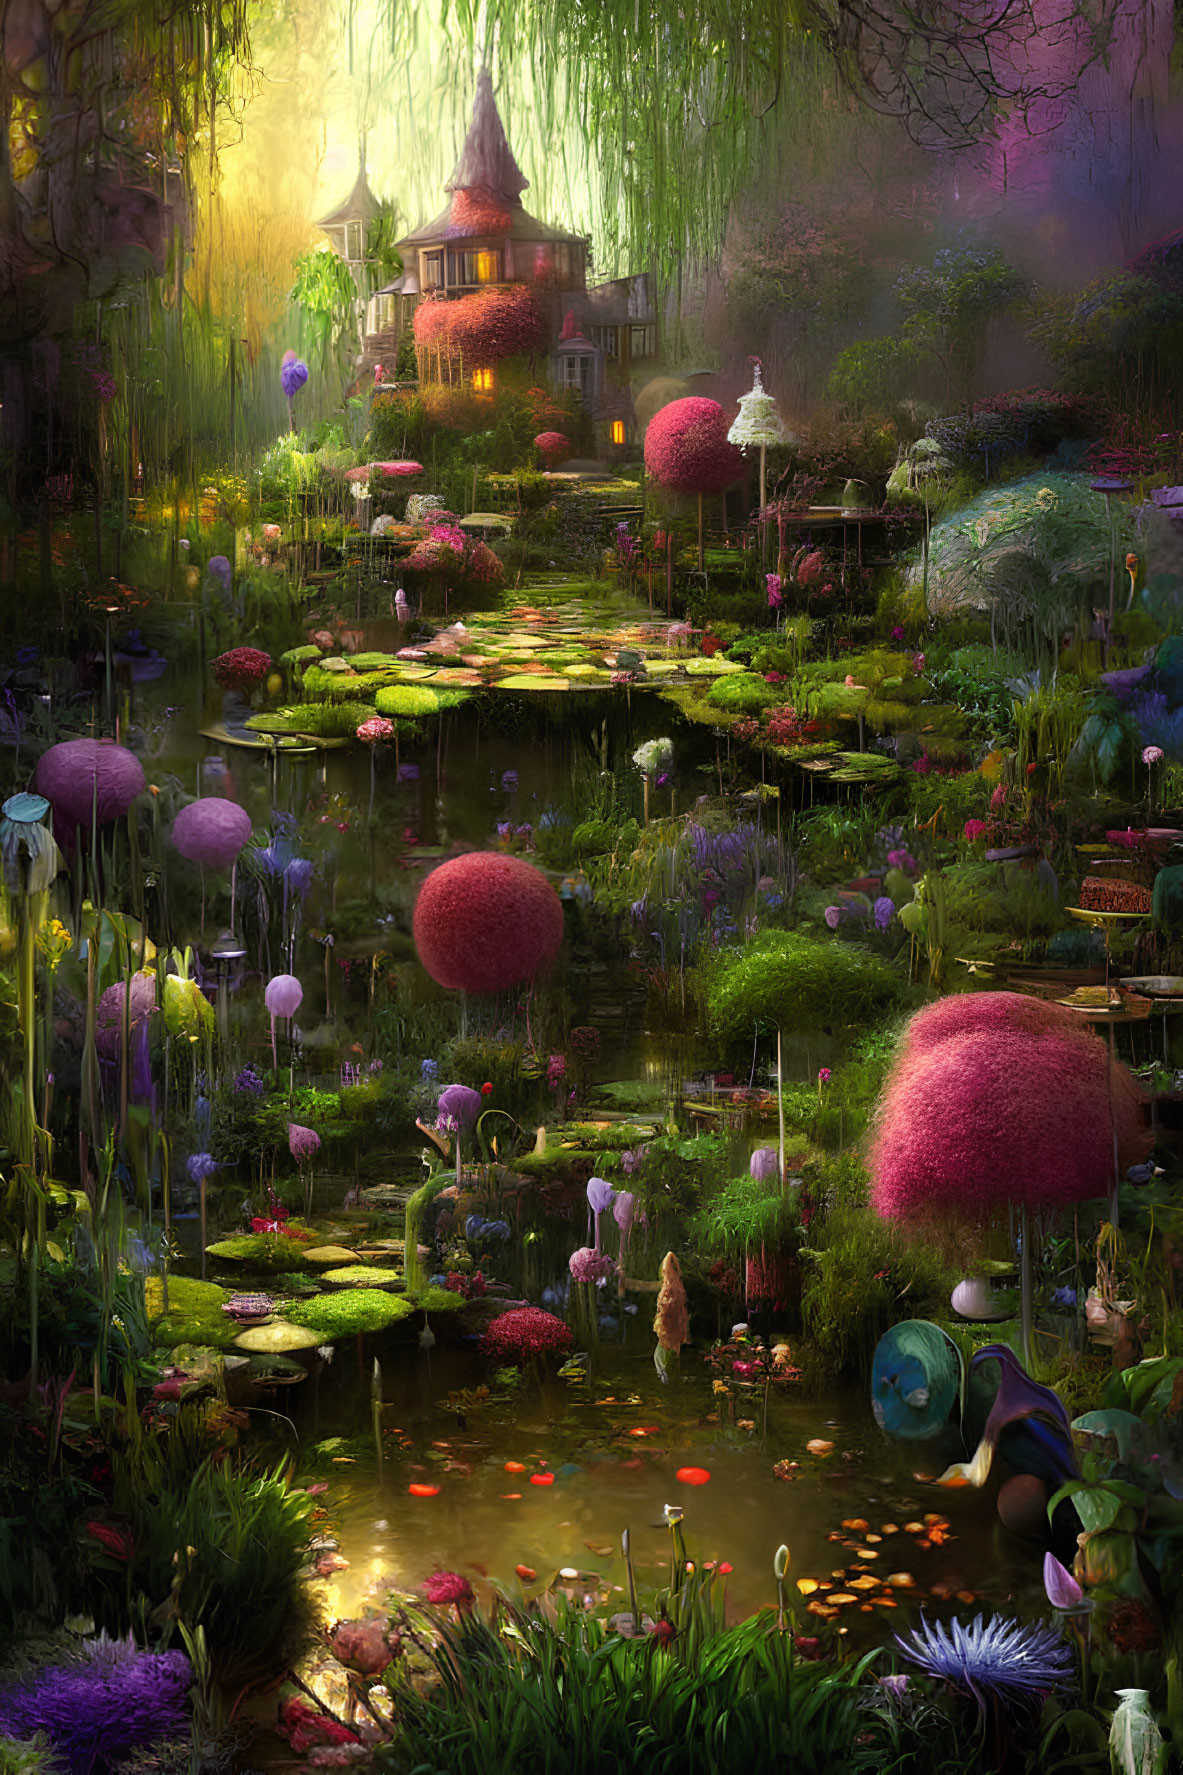 Whimsical garden with pond, cottage, mushrooms, and lights